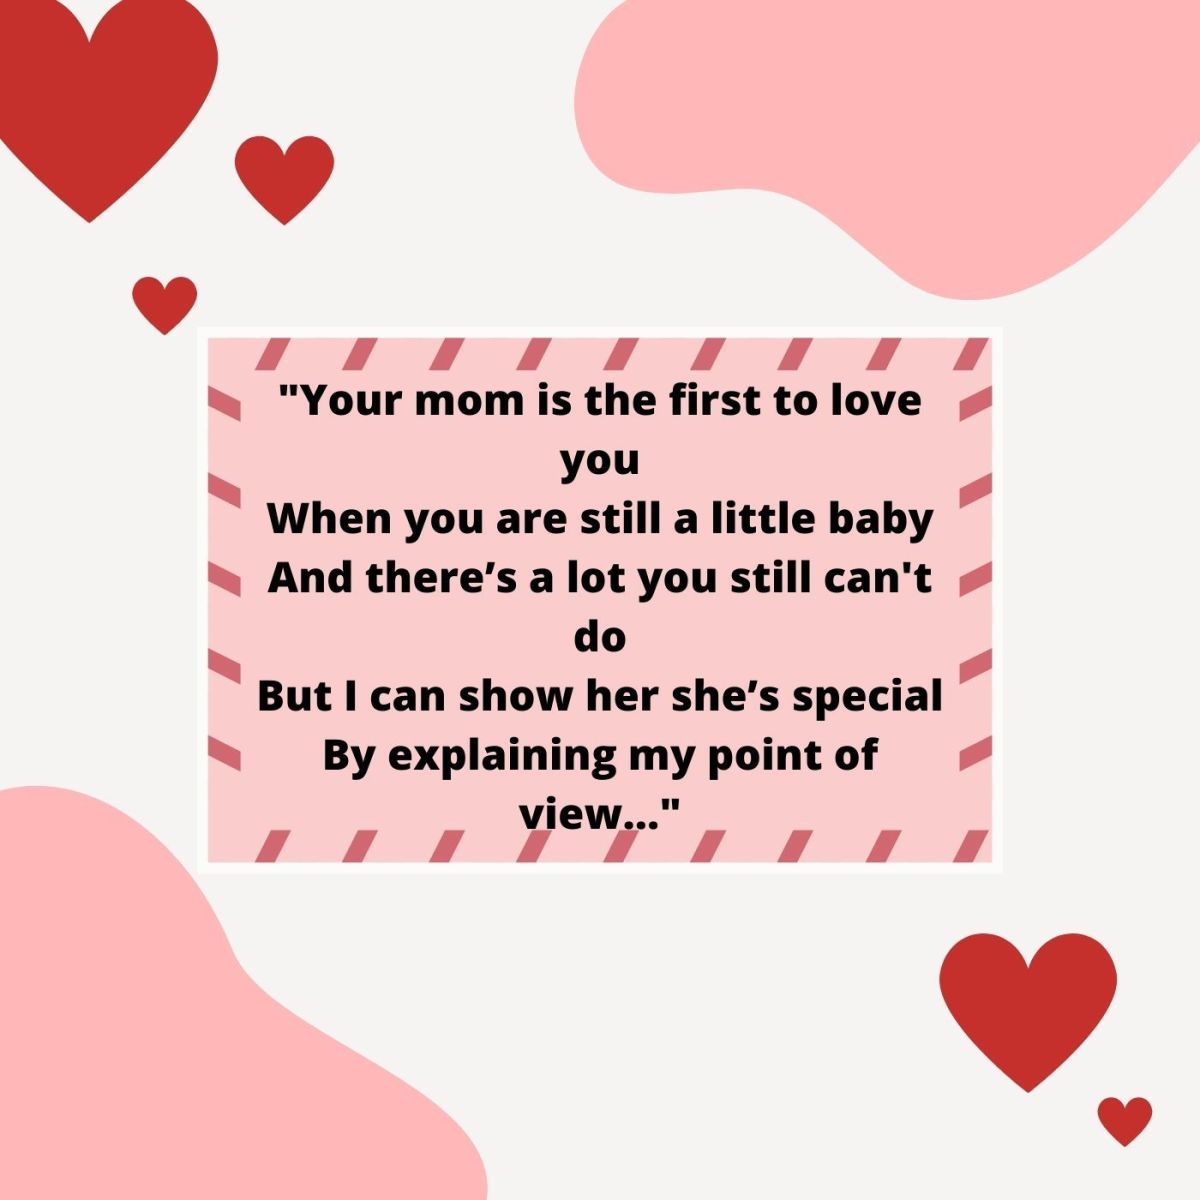 Your mom is always your first love.